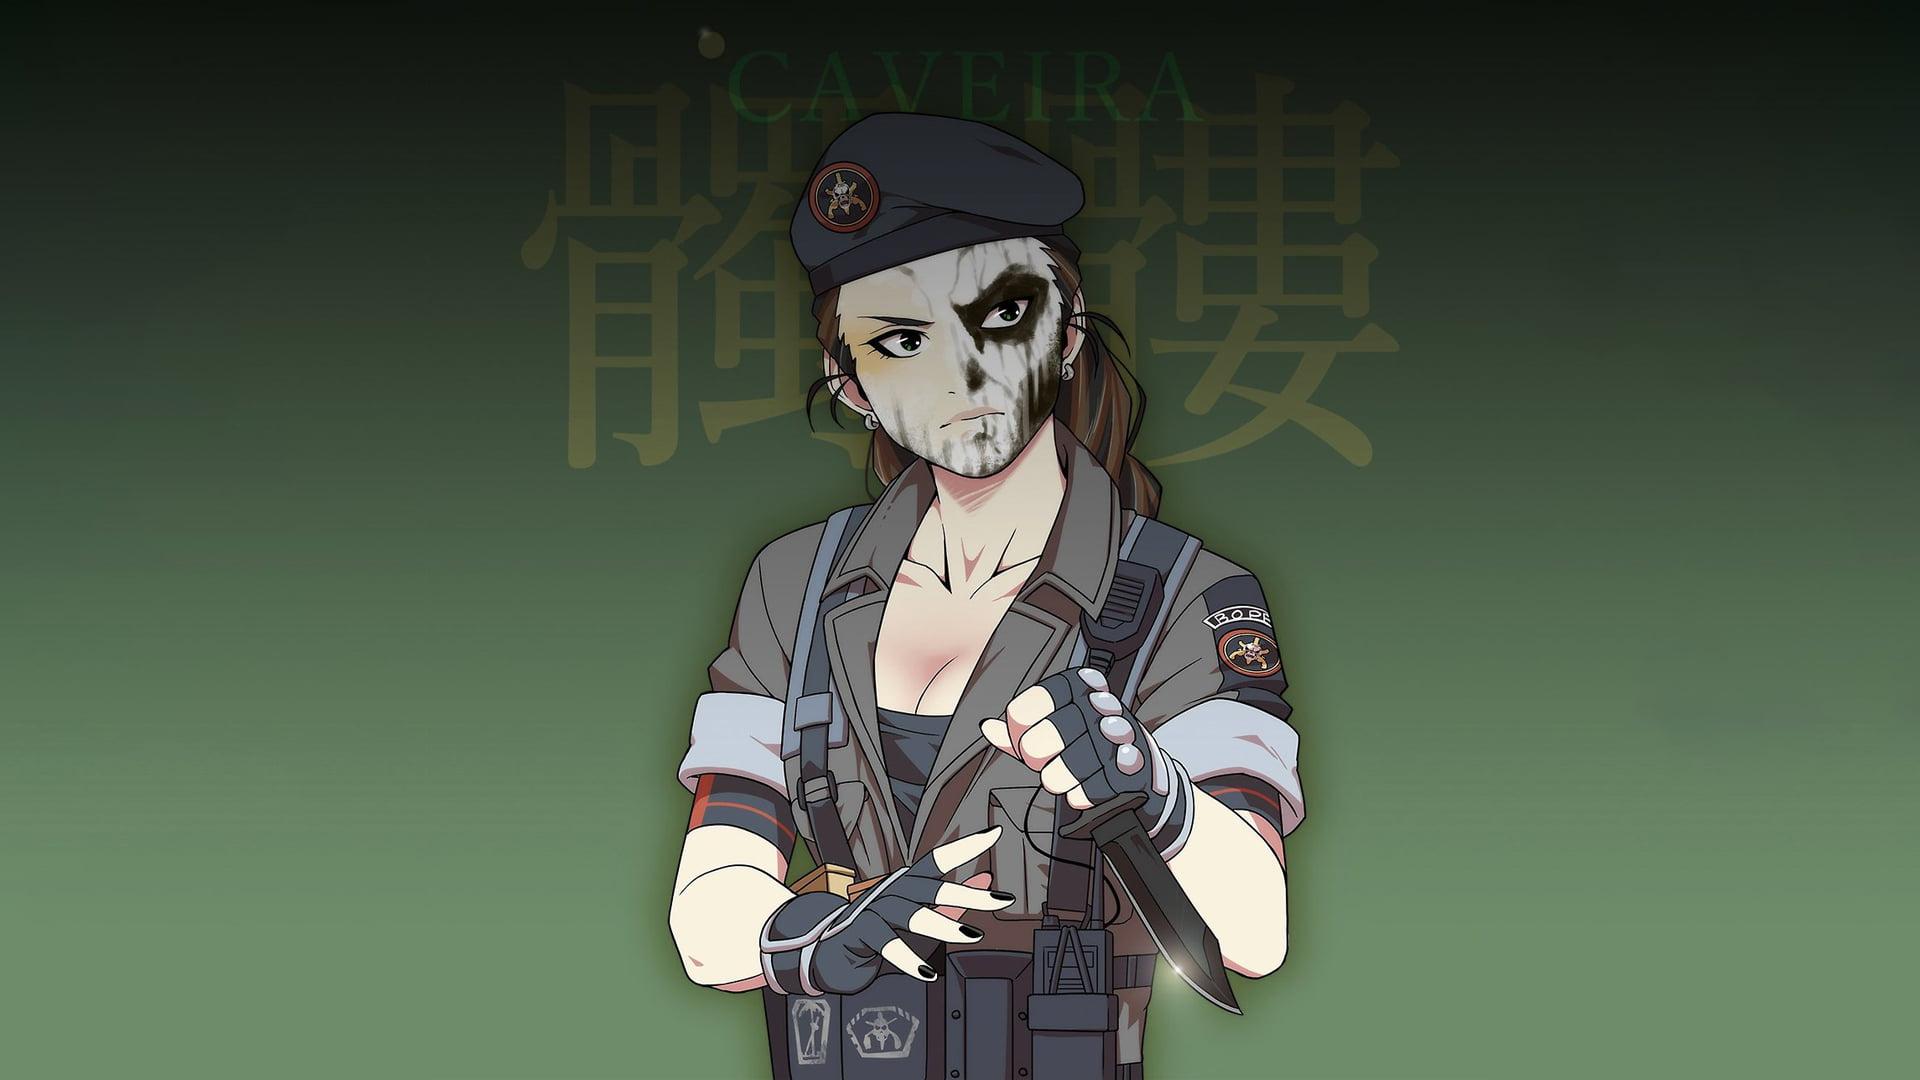 Woman in gray and black suit illustration, Caveira, Rainbow Six